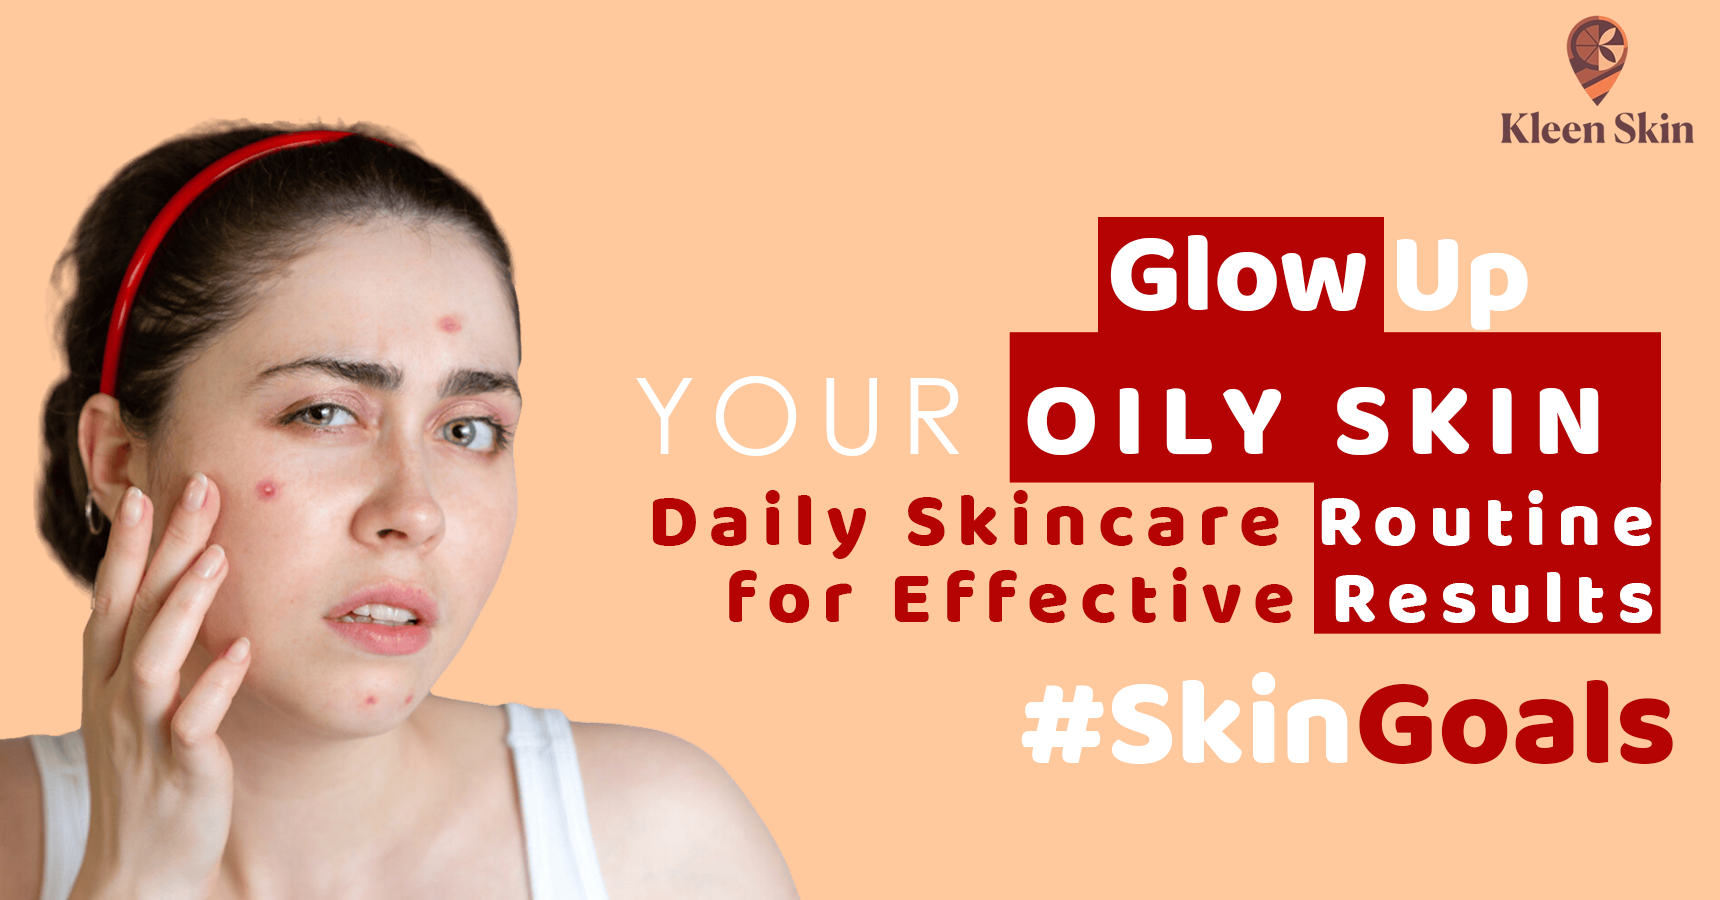 Fighting Oily Skin Issues? Follow This Daily Skincare Routine for Radiant Results